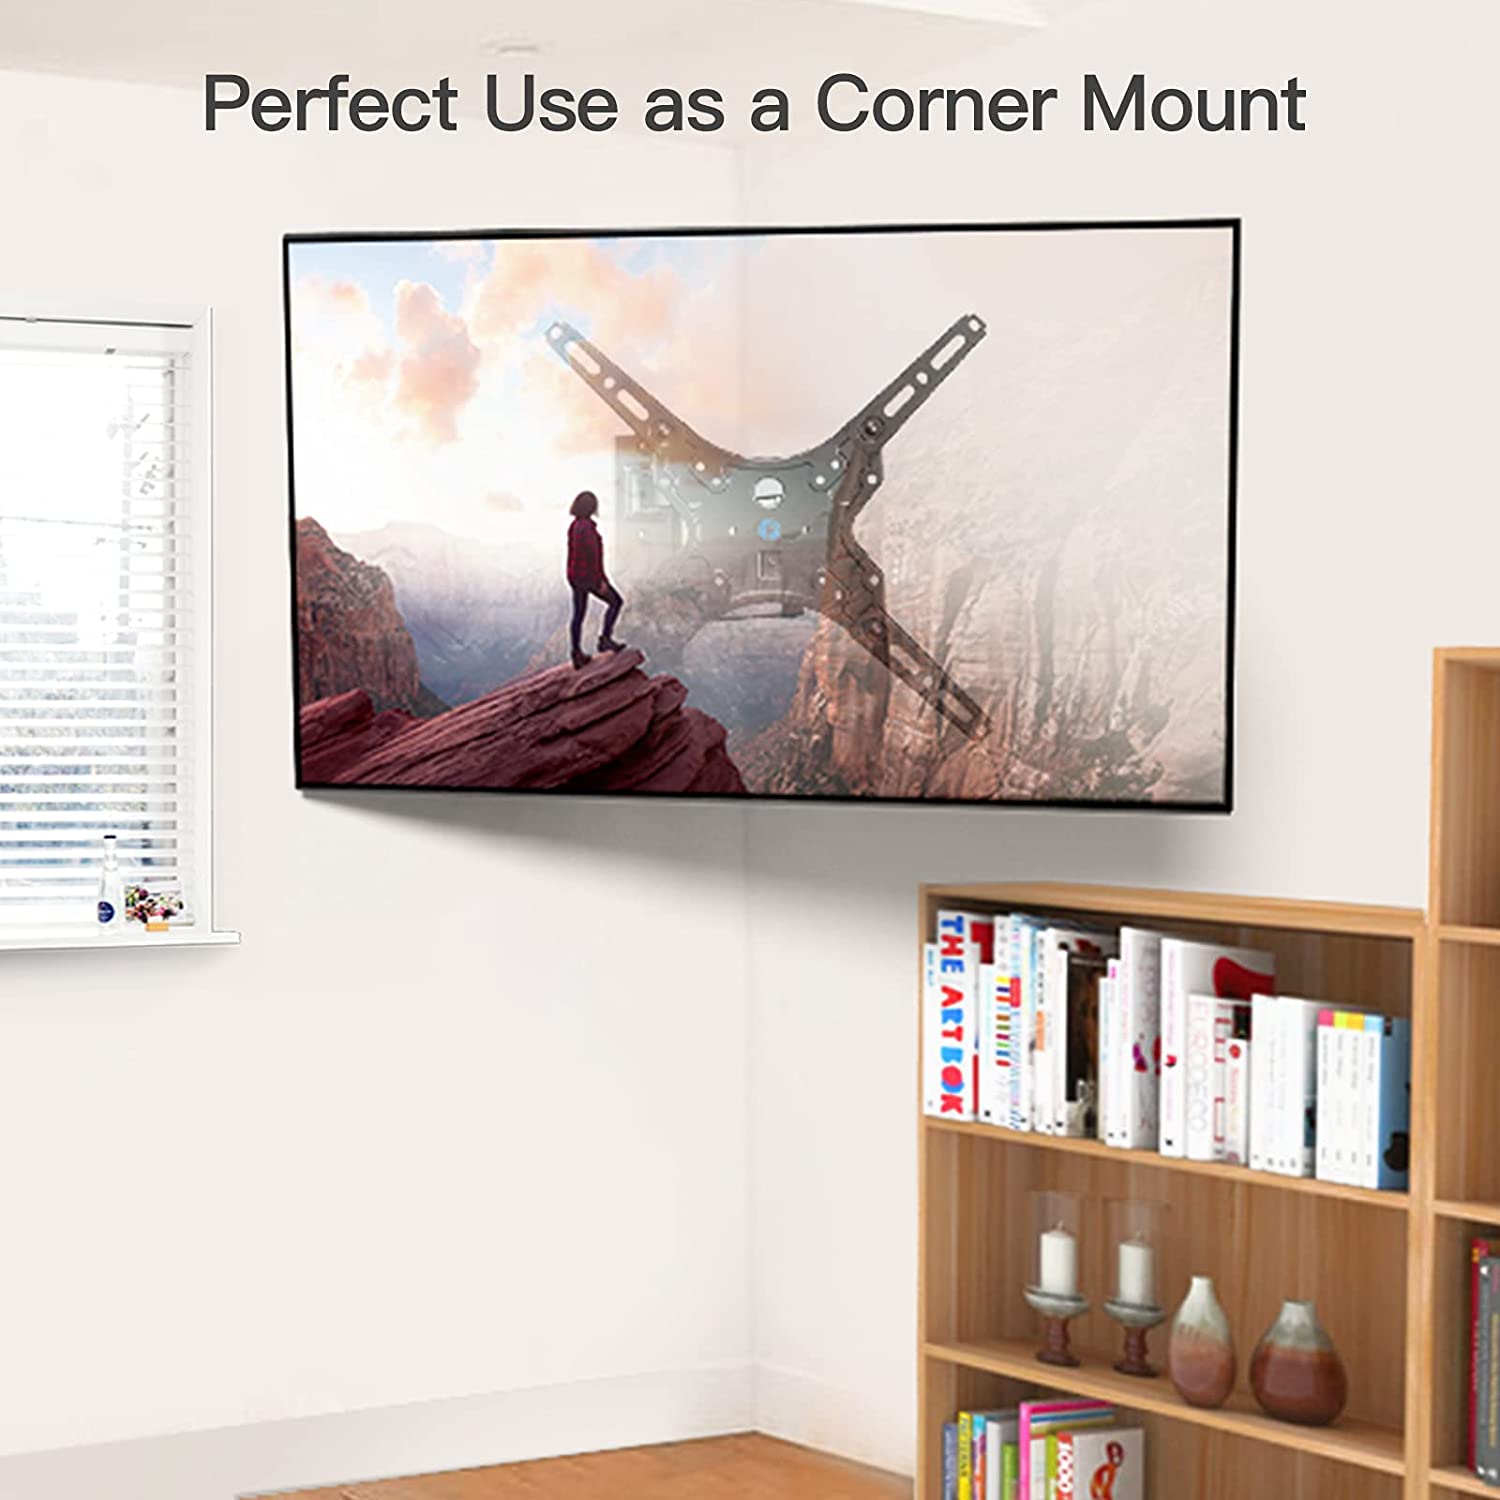 Full Motion TV Monitor Wall Mount For 26